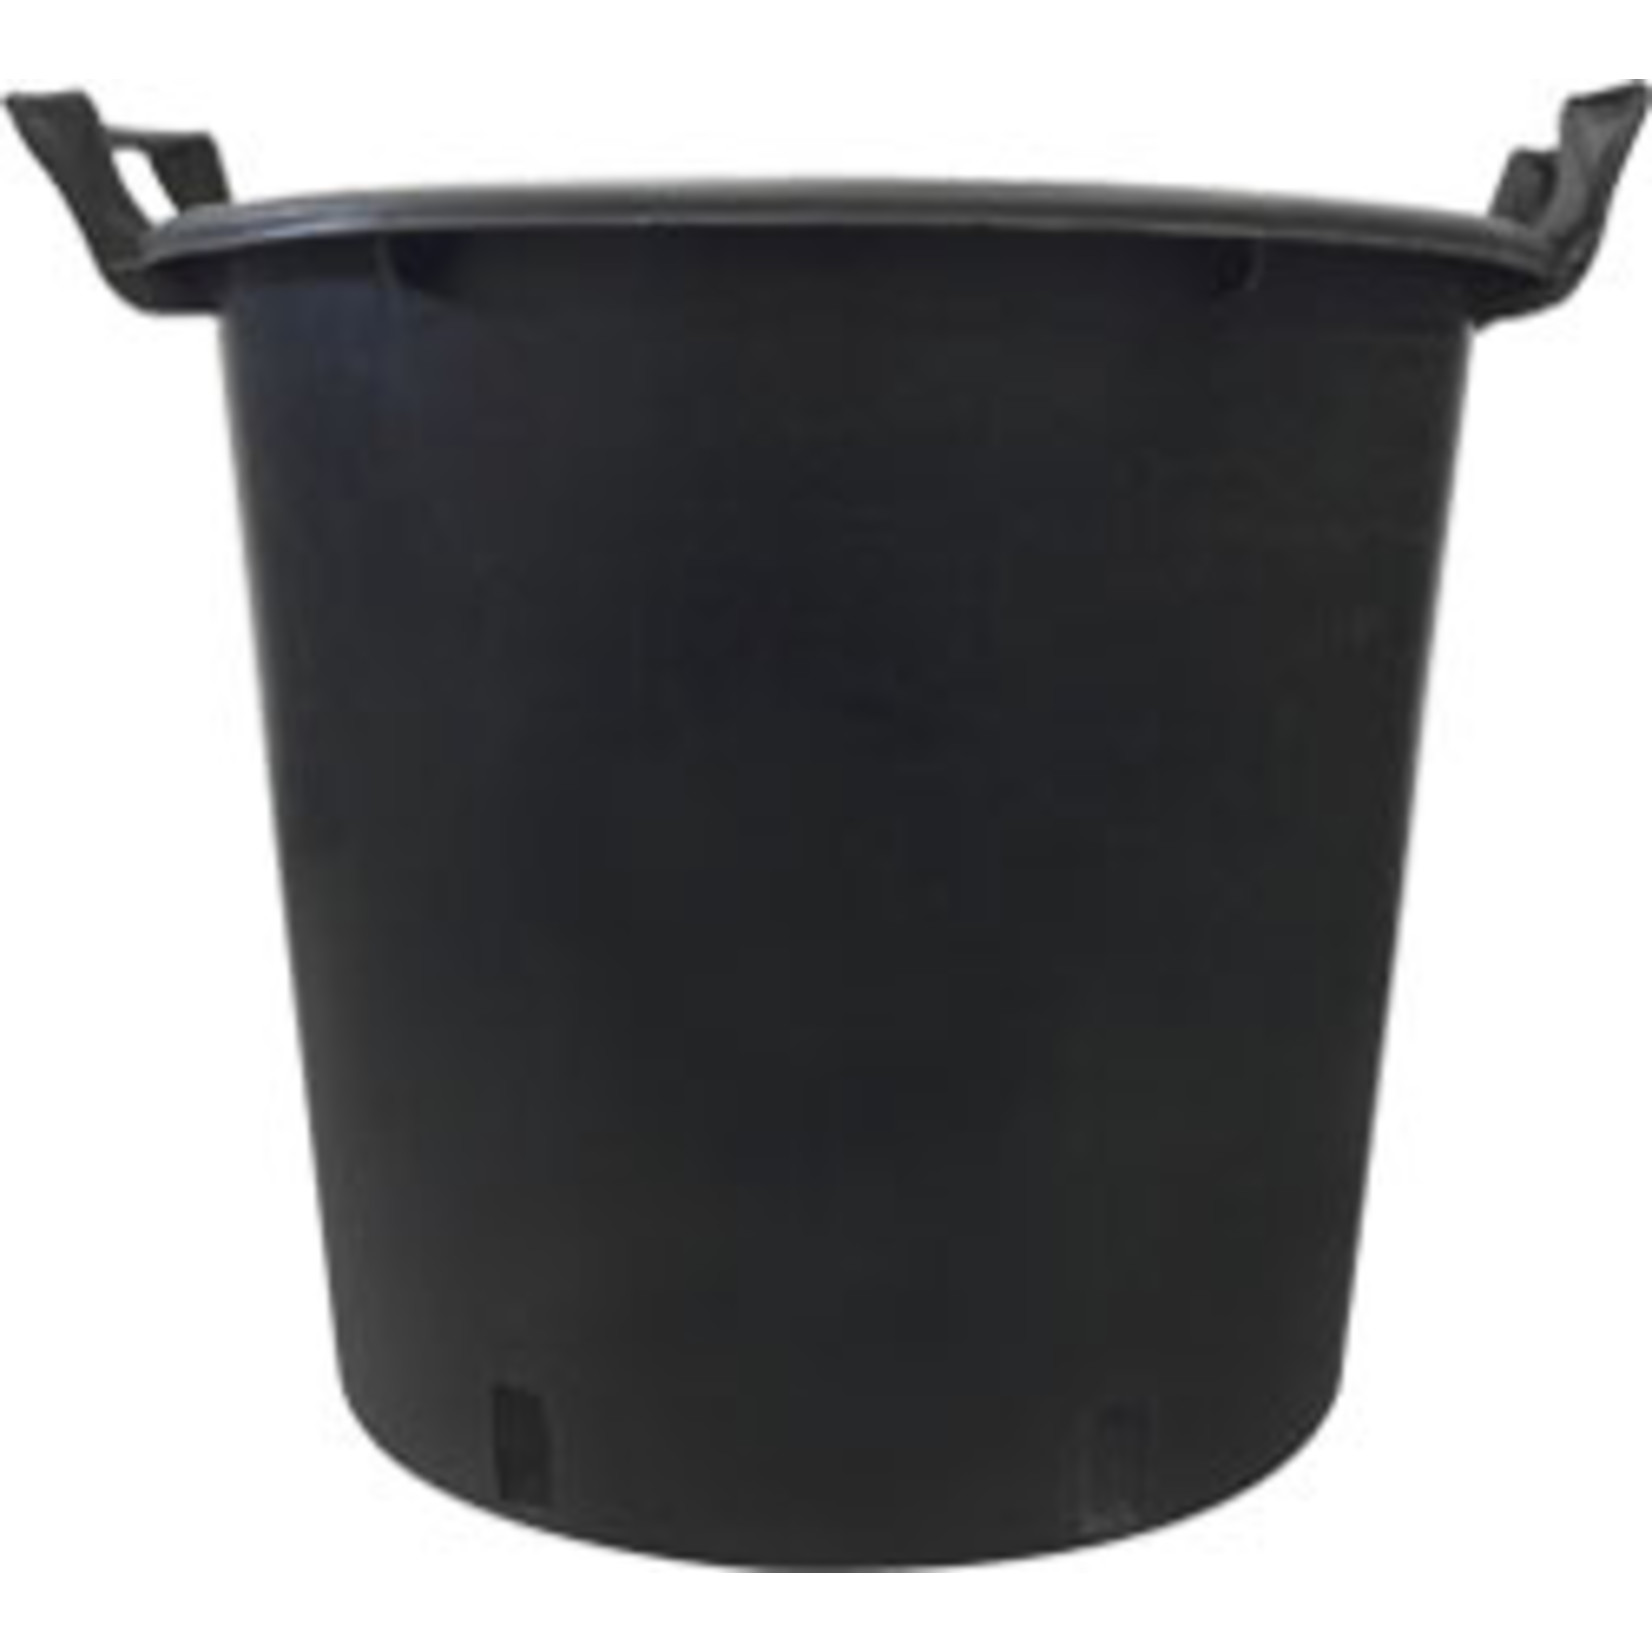 MONDI TREE CONTAINER WITH HANDLES 20" / 65L